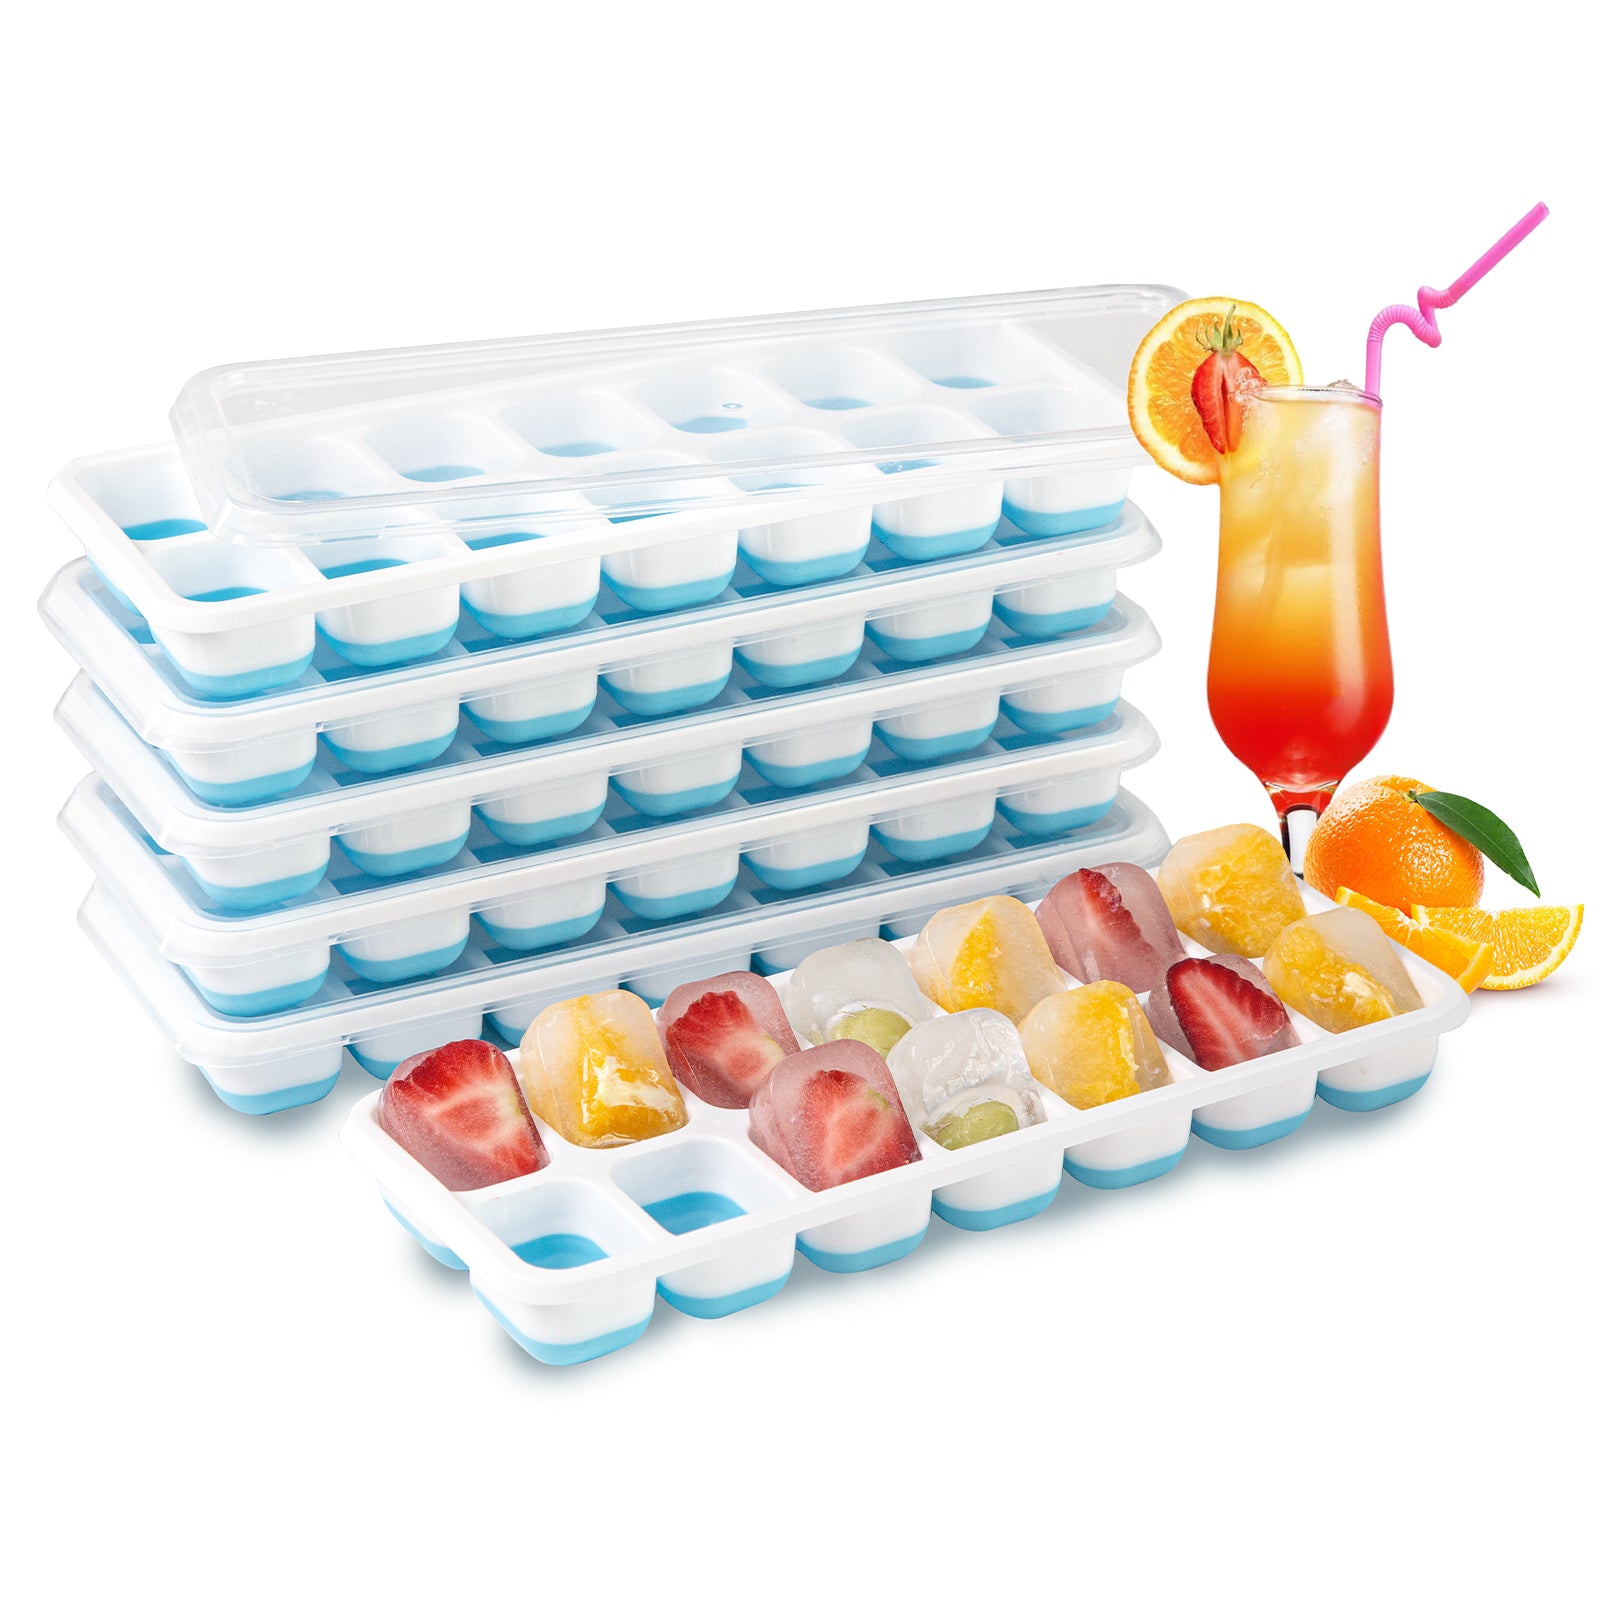 Ice Cube Tray With Lid, Ice Cube Tray For Freezer, Ice Cube Tray